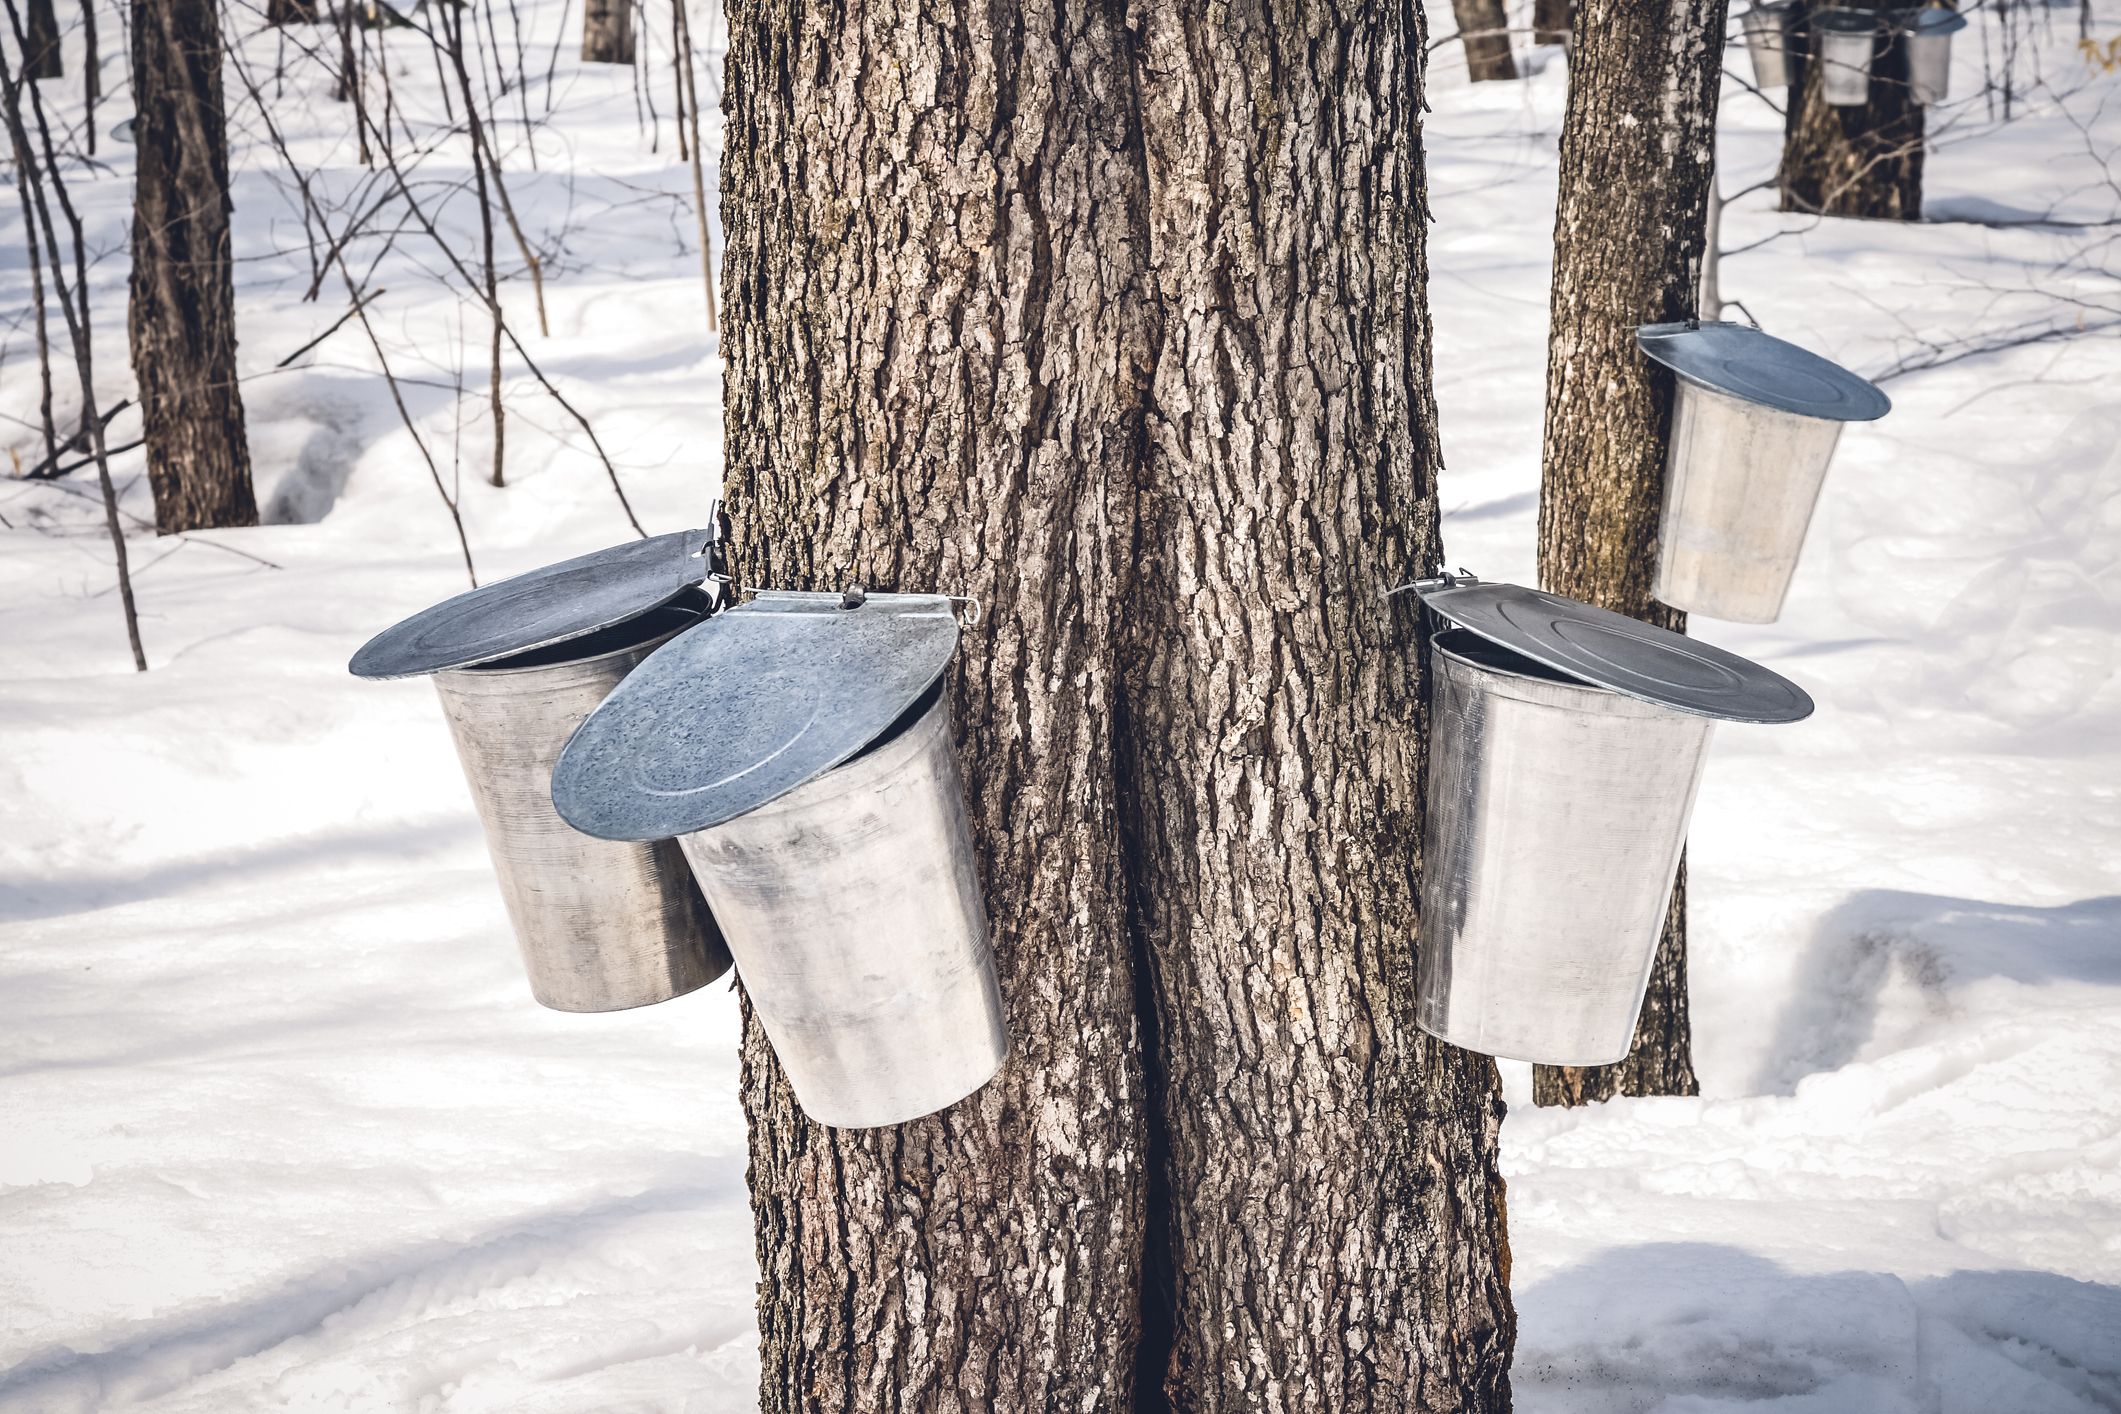 Maple syrup time and simple evaporating stoves